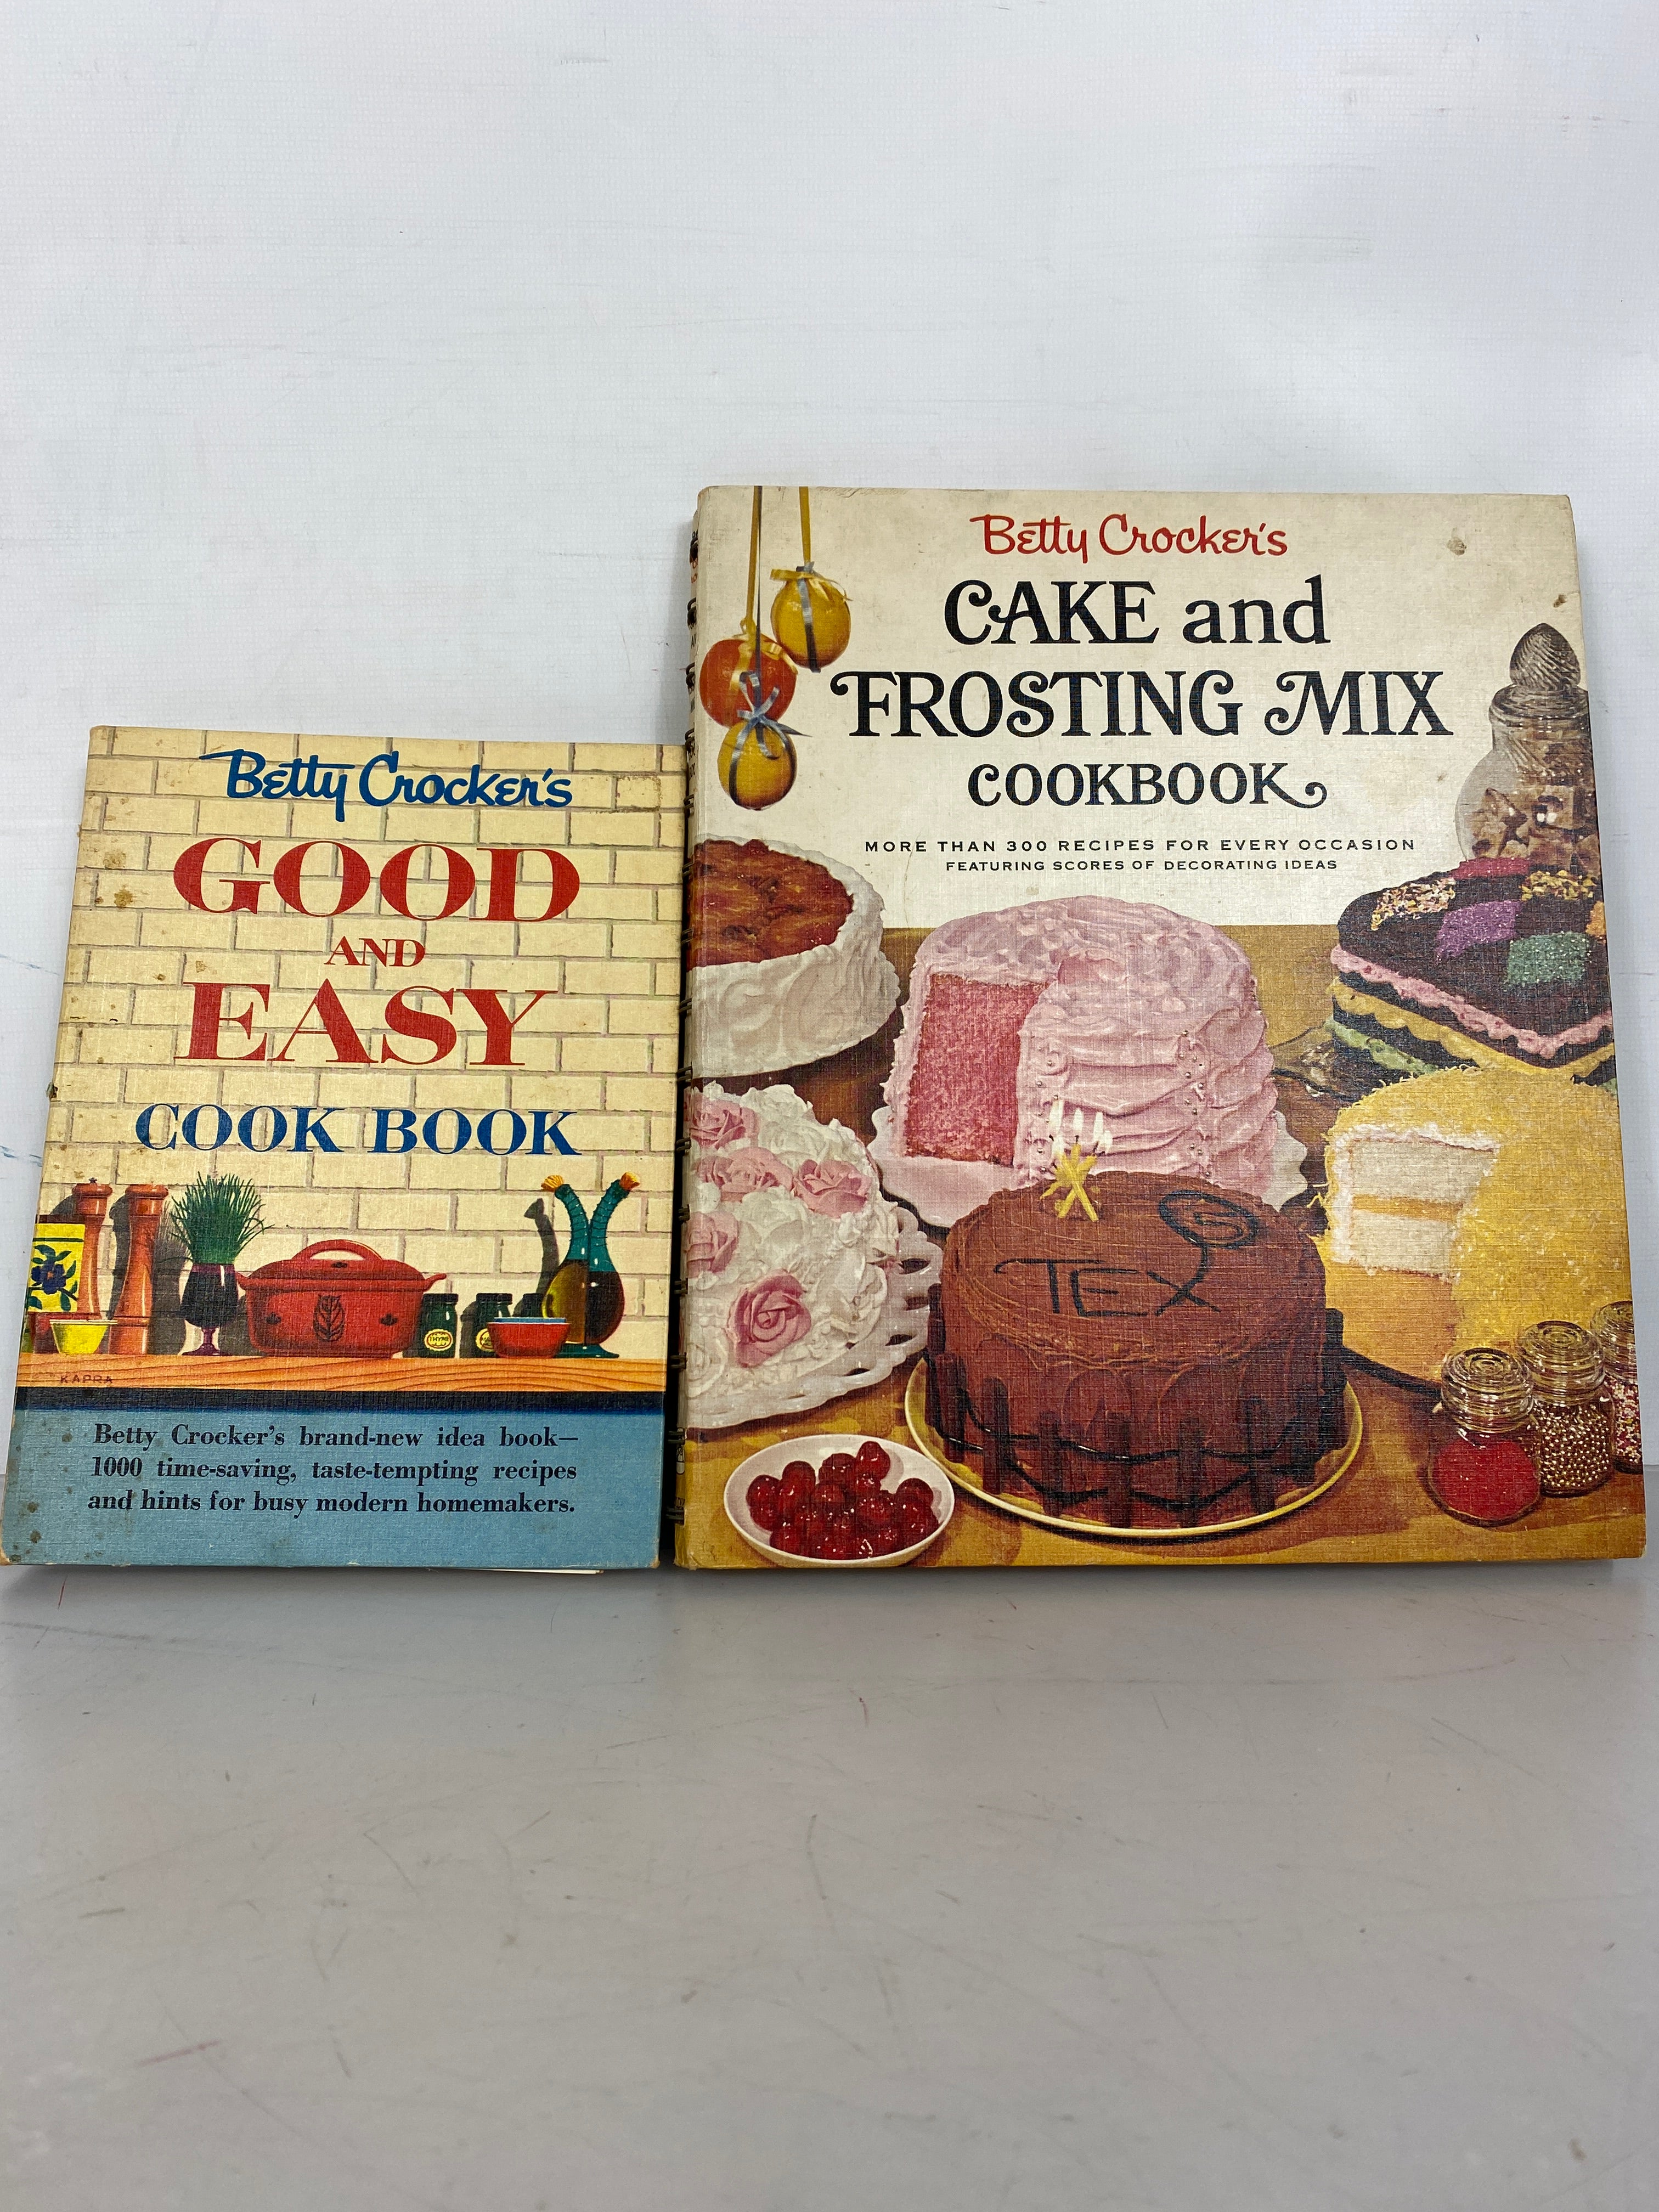 Lot of 2: Good and Easy Cook Book 1954 / Cake and Frosting Mix Cookbook 1966 HC